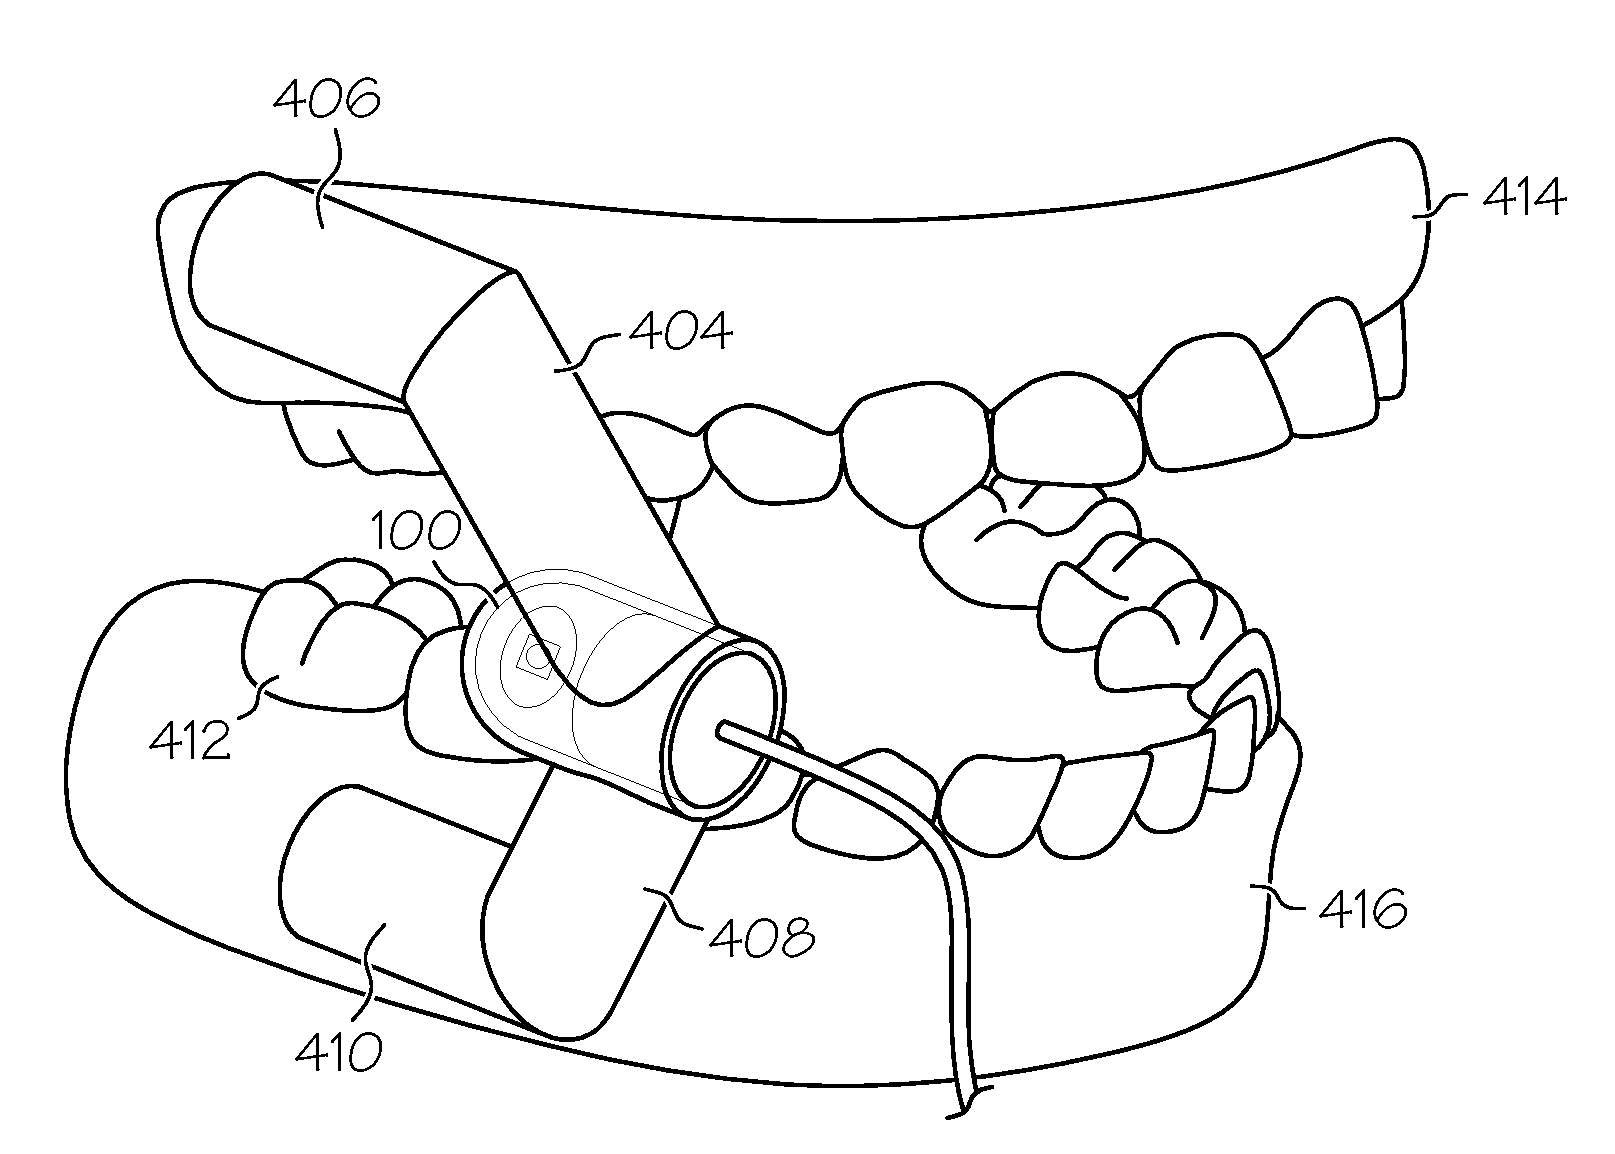 System and method to improve mouth disease diagnosis